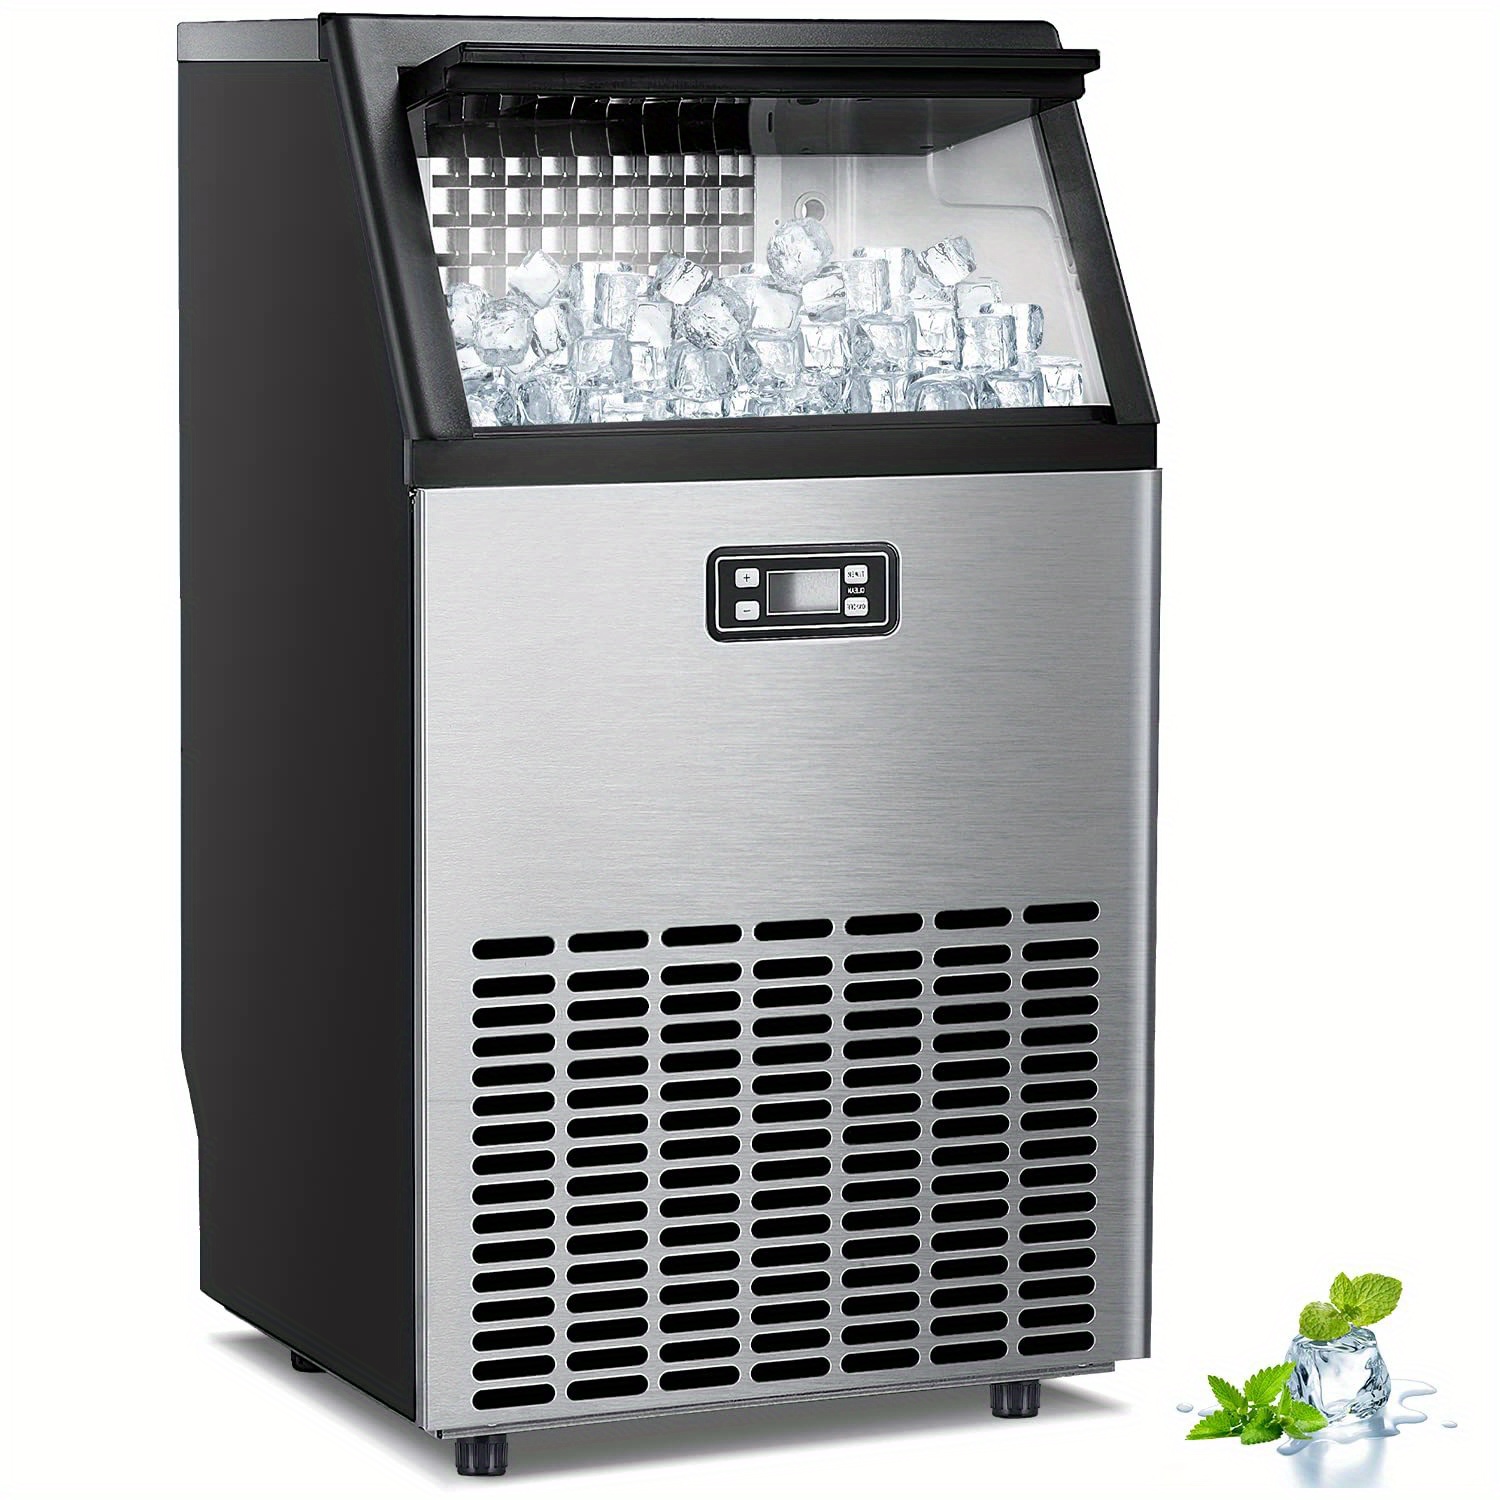 

Commercial 100lbs/24h With 33lbs Ice Bin, Under Counter Ice Machine, Stainless Steel Freestanding Ice Maker For Restaurant/bar/home/cafe/office, With Scoop